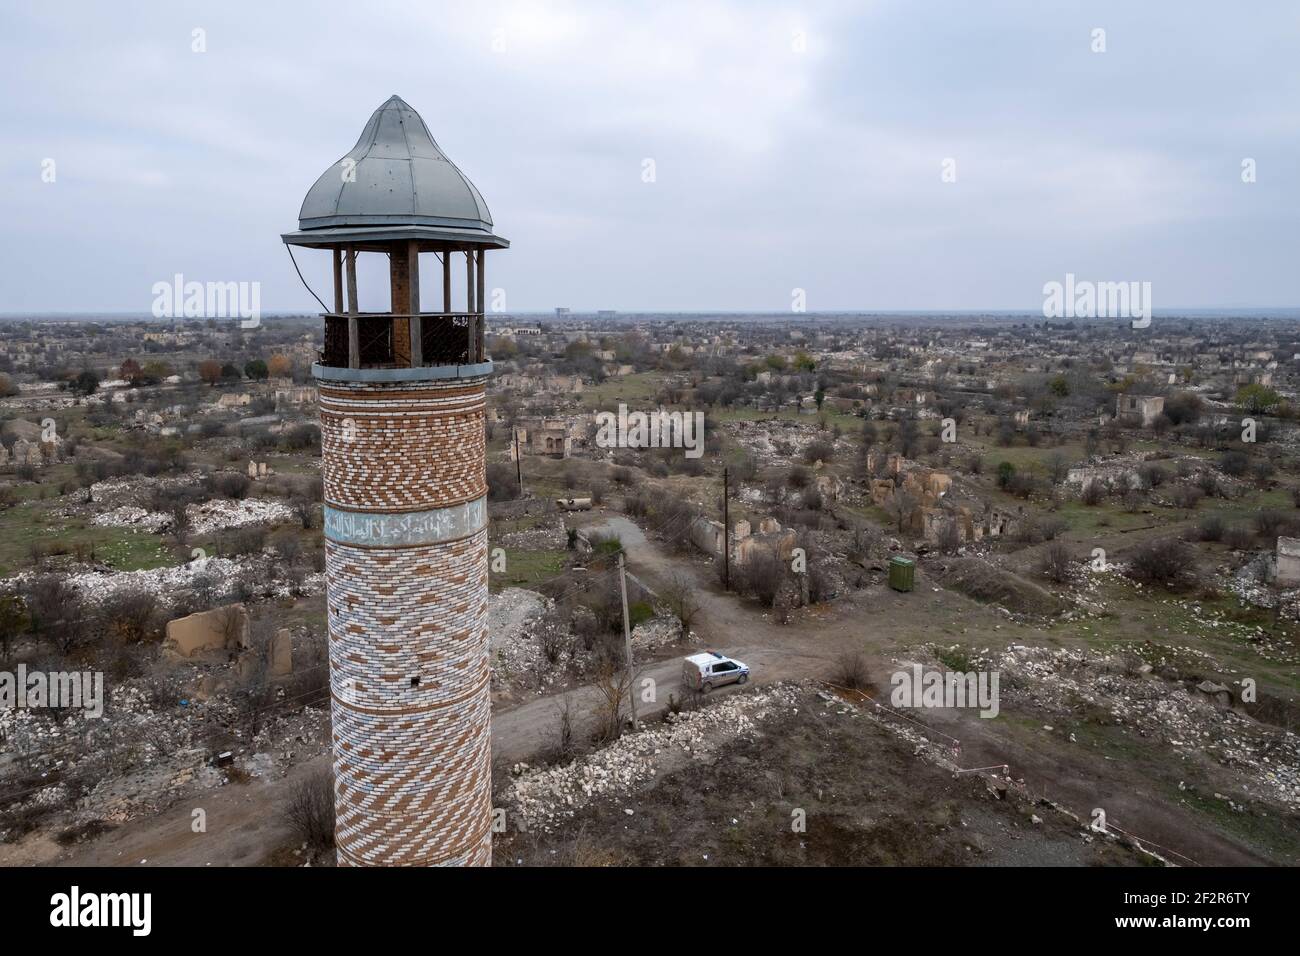 AGDAM, AZERBAIJAN - DECEMBER 14: View from the19th century Juma Mosque the only building left standing in the town of Agdam which was destroyed by Armenian forces during the First Nagorno-Karabakh War on December 14, 2020 in Agdam, Azerbaijan. The town and its surrounding district were returned to Azerbaijani control as part of an agreement that ended the 2020 Nagorno-Karabakh War. Stock Photo